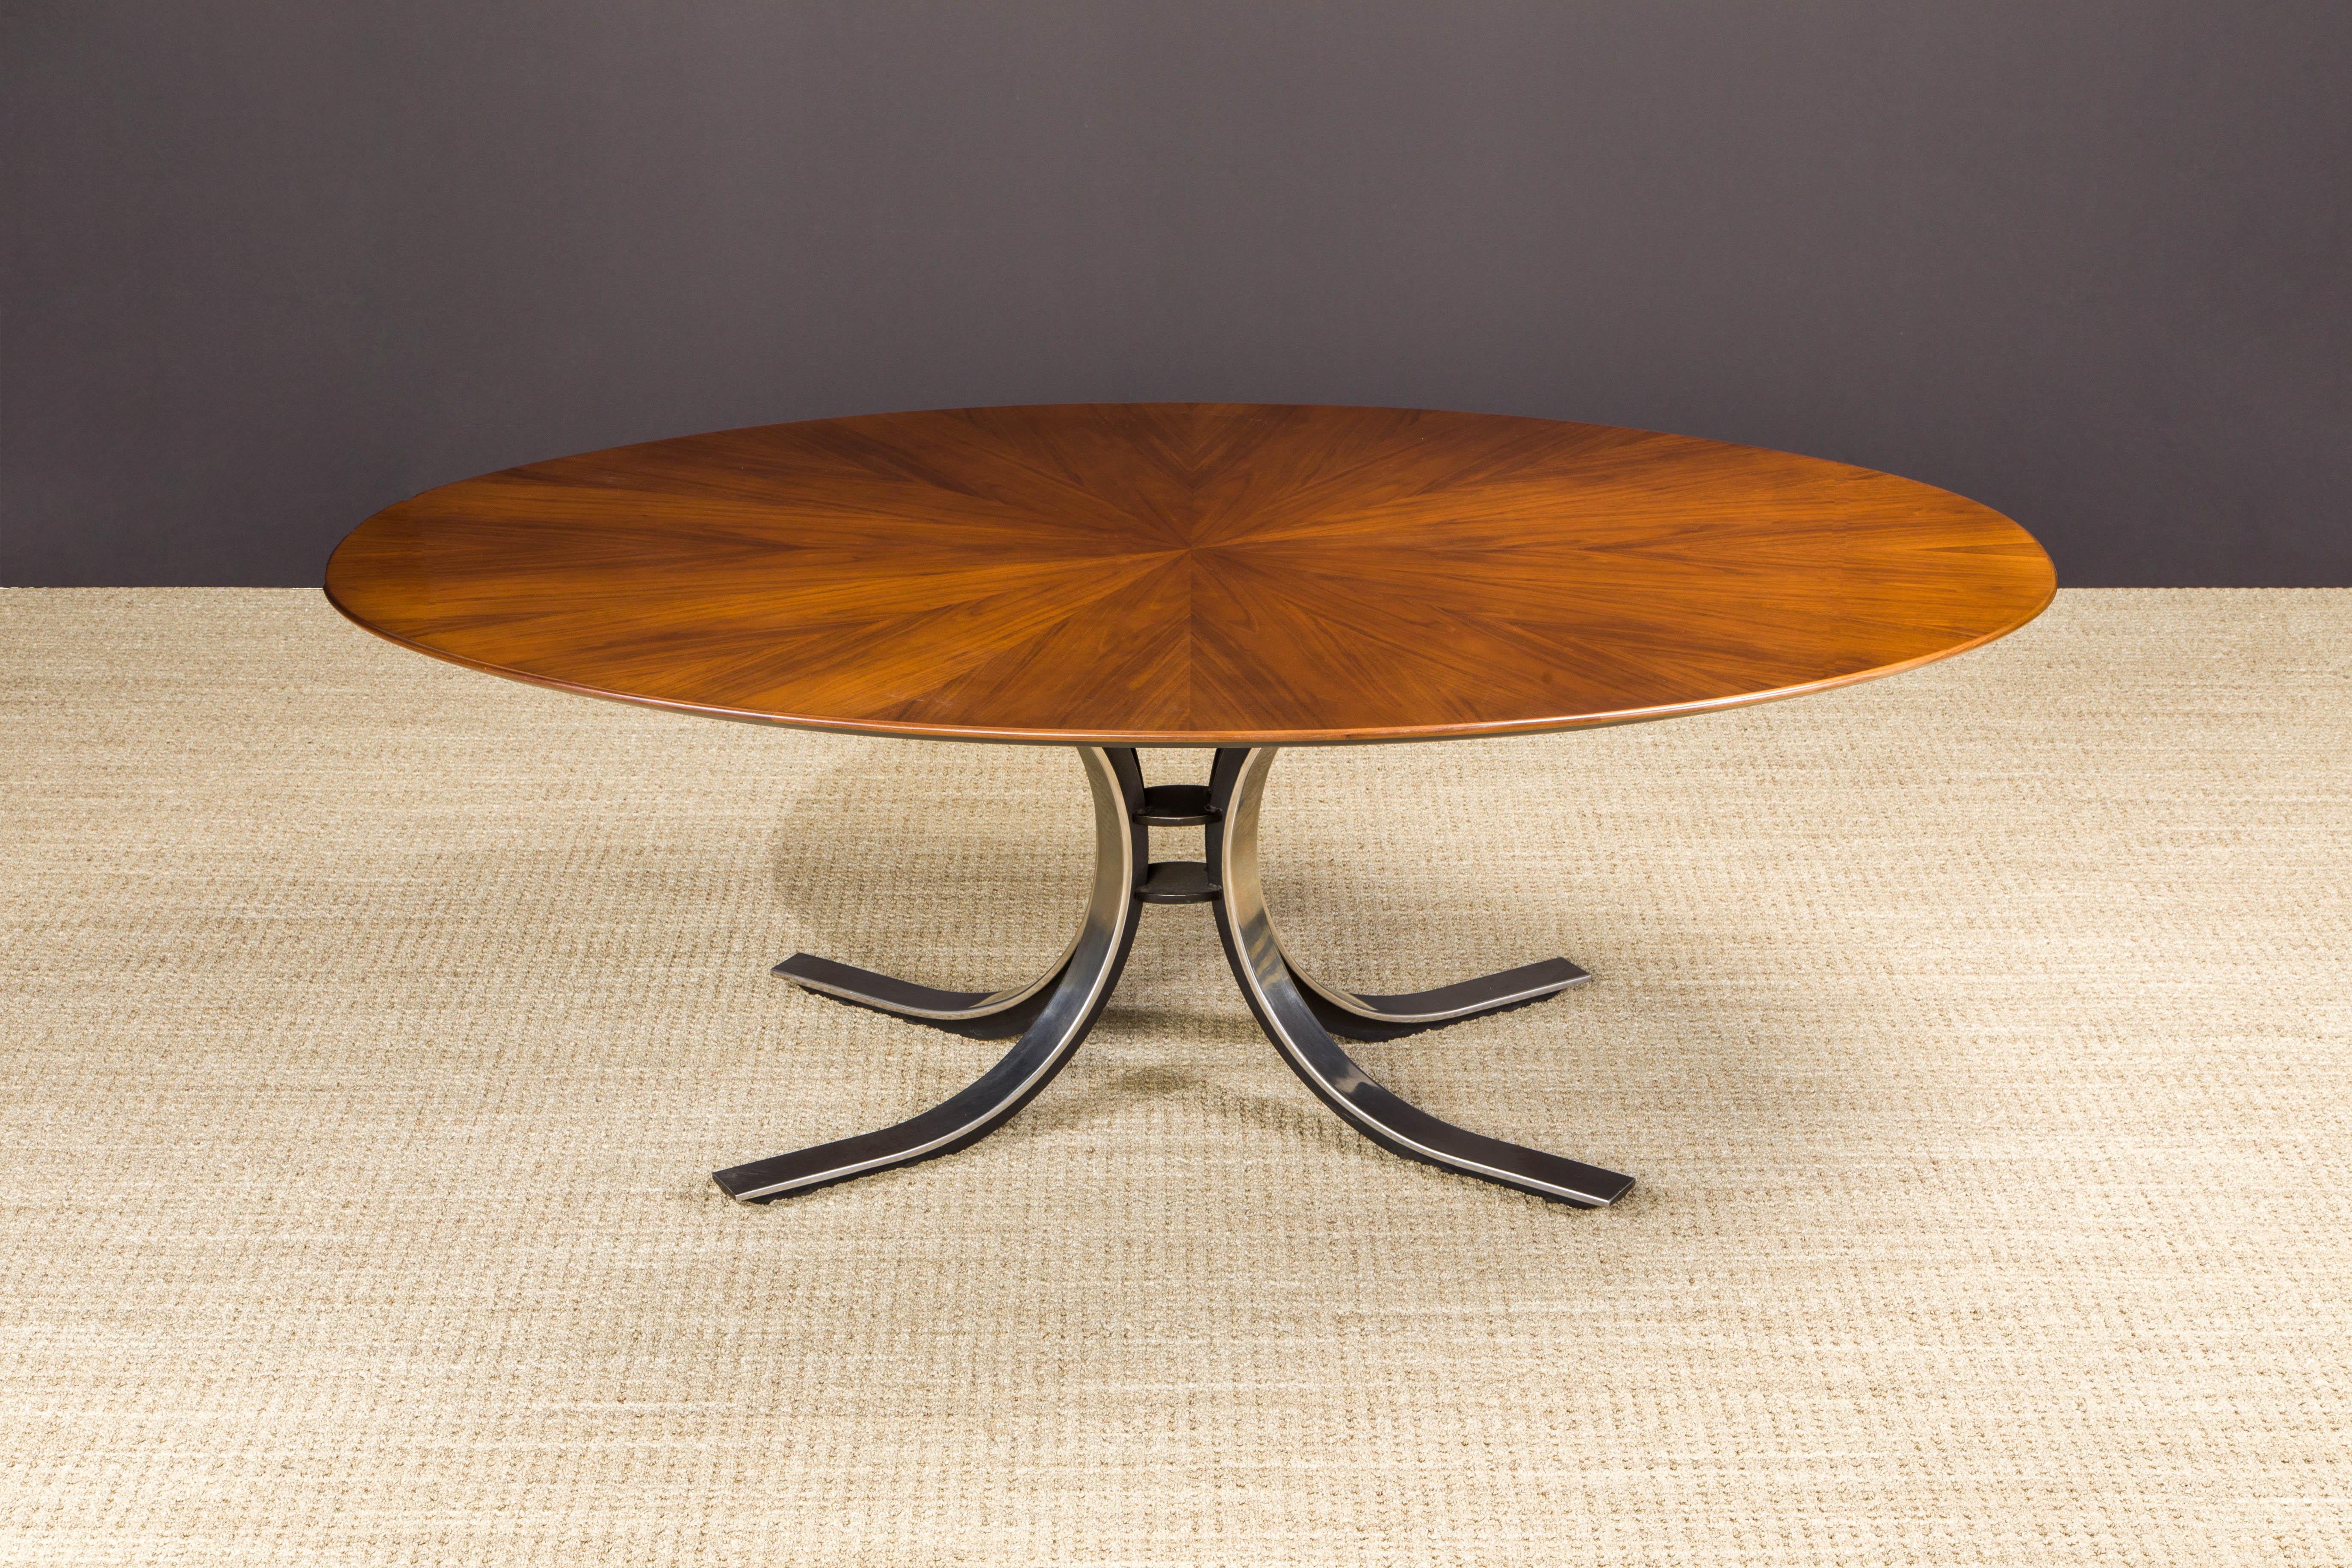 American Starburst Oval Dining Table by Osvaldo Borsani for Stow Davis, 1970s, Refinished